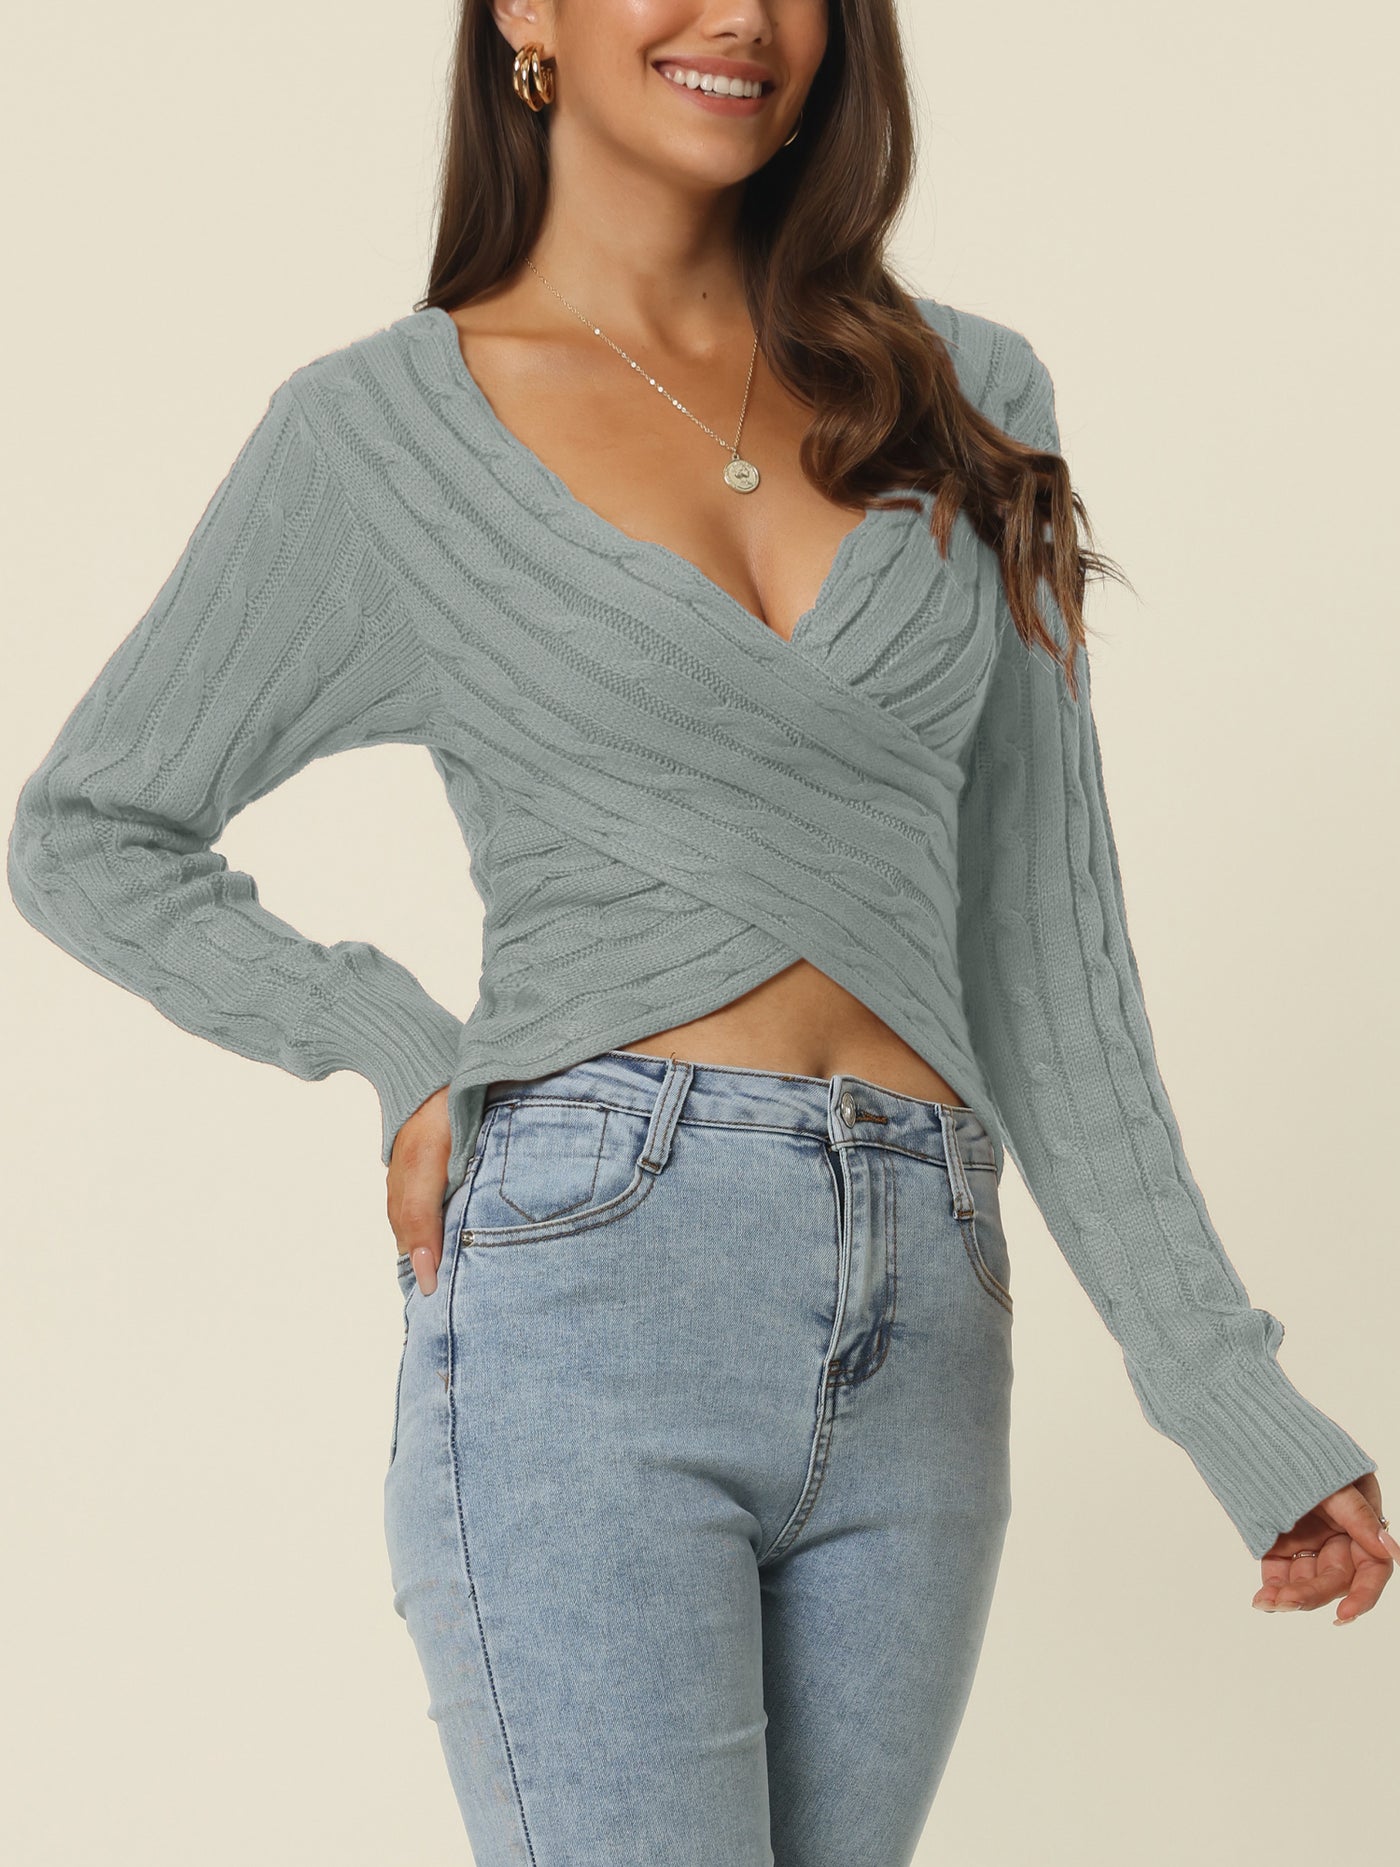 Bublédon Women's Fall Winter Wrap V Neck Long Sleeve Ribbed Knit Crop Sweater Tops